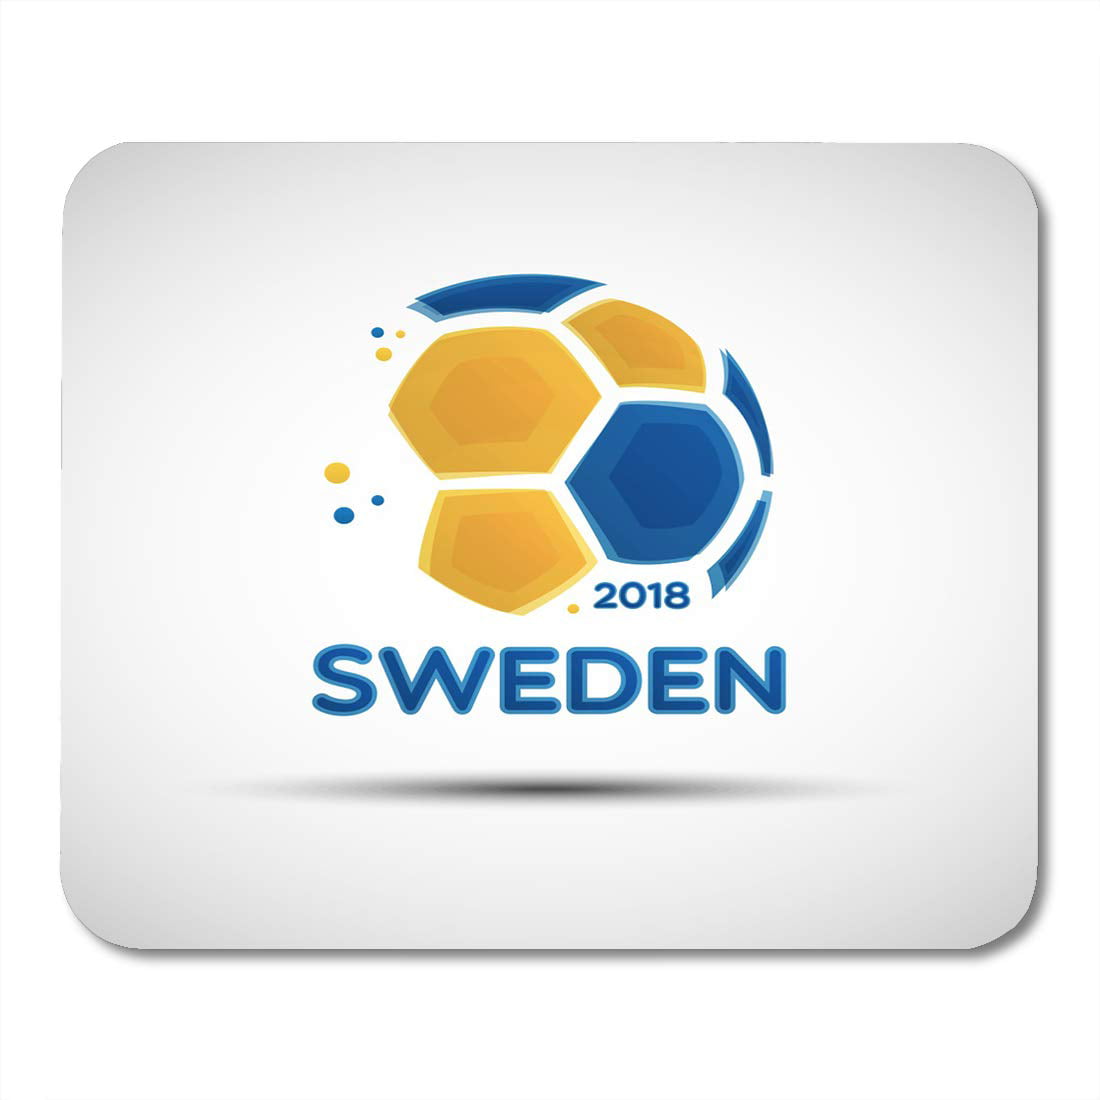 Stationær igen build Football Championship Flag of Sweden Abstract Soccer Ball with Swedish  National Colors for Your Design Mousepad Mouse Pad Mouse Mat 9x10 inch -  Walmart.com